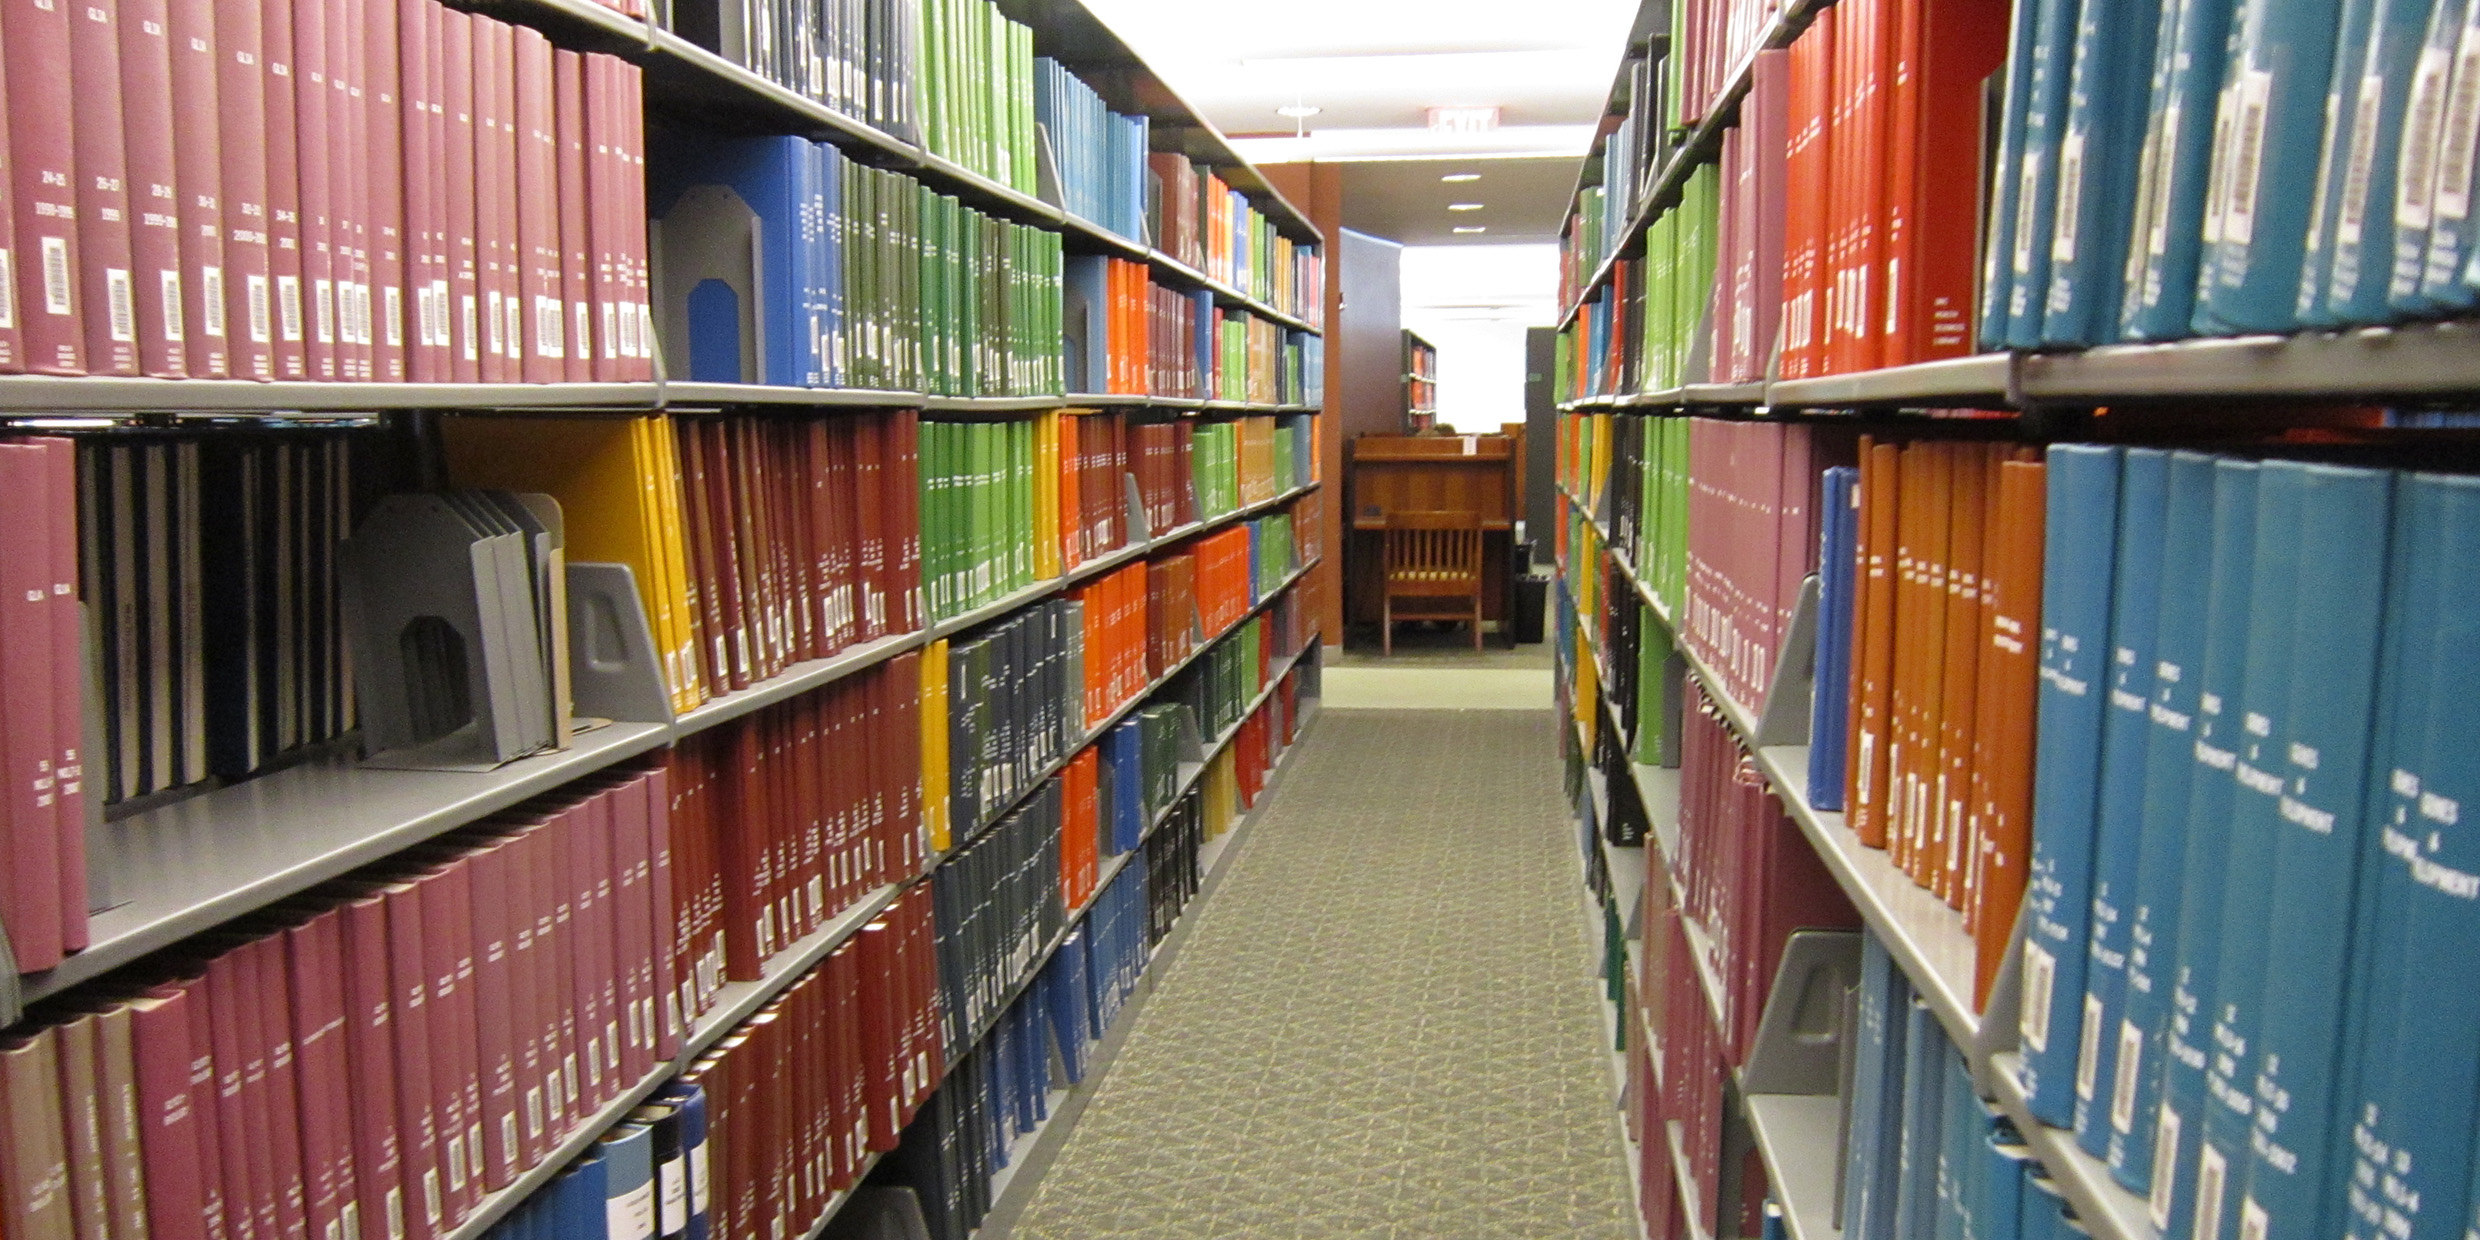 Image of journals in library